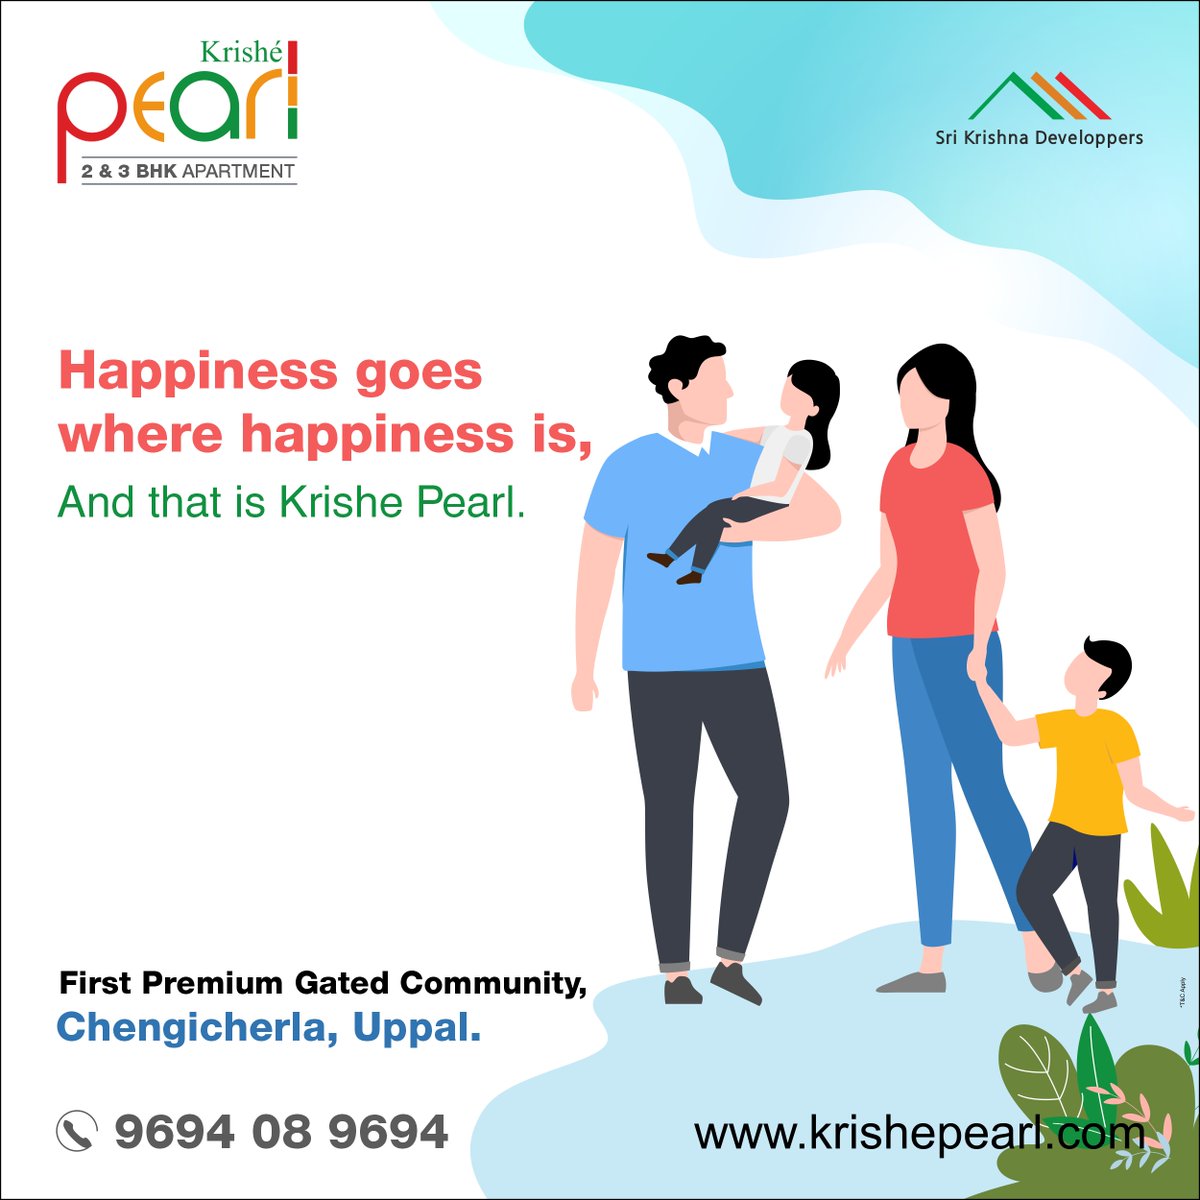 Isn't that true? The biggest happiness that we do get is where home is. A place to not just live but every moment to be captured in memories. Let that place be here at krishe pearl
#srikrishnadeveloppers #srikrishnagroup #krishepearl #premiumflats #2BHKapartments #3BHKapartments